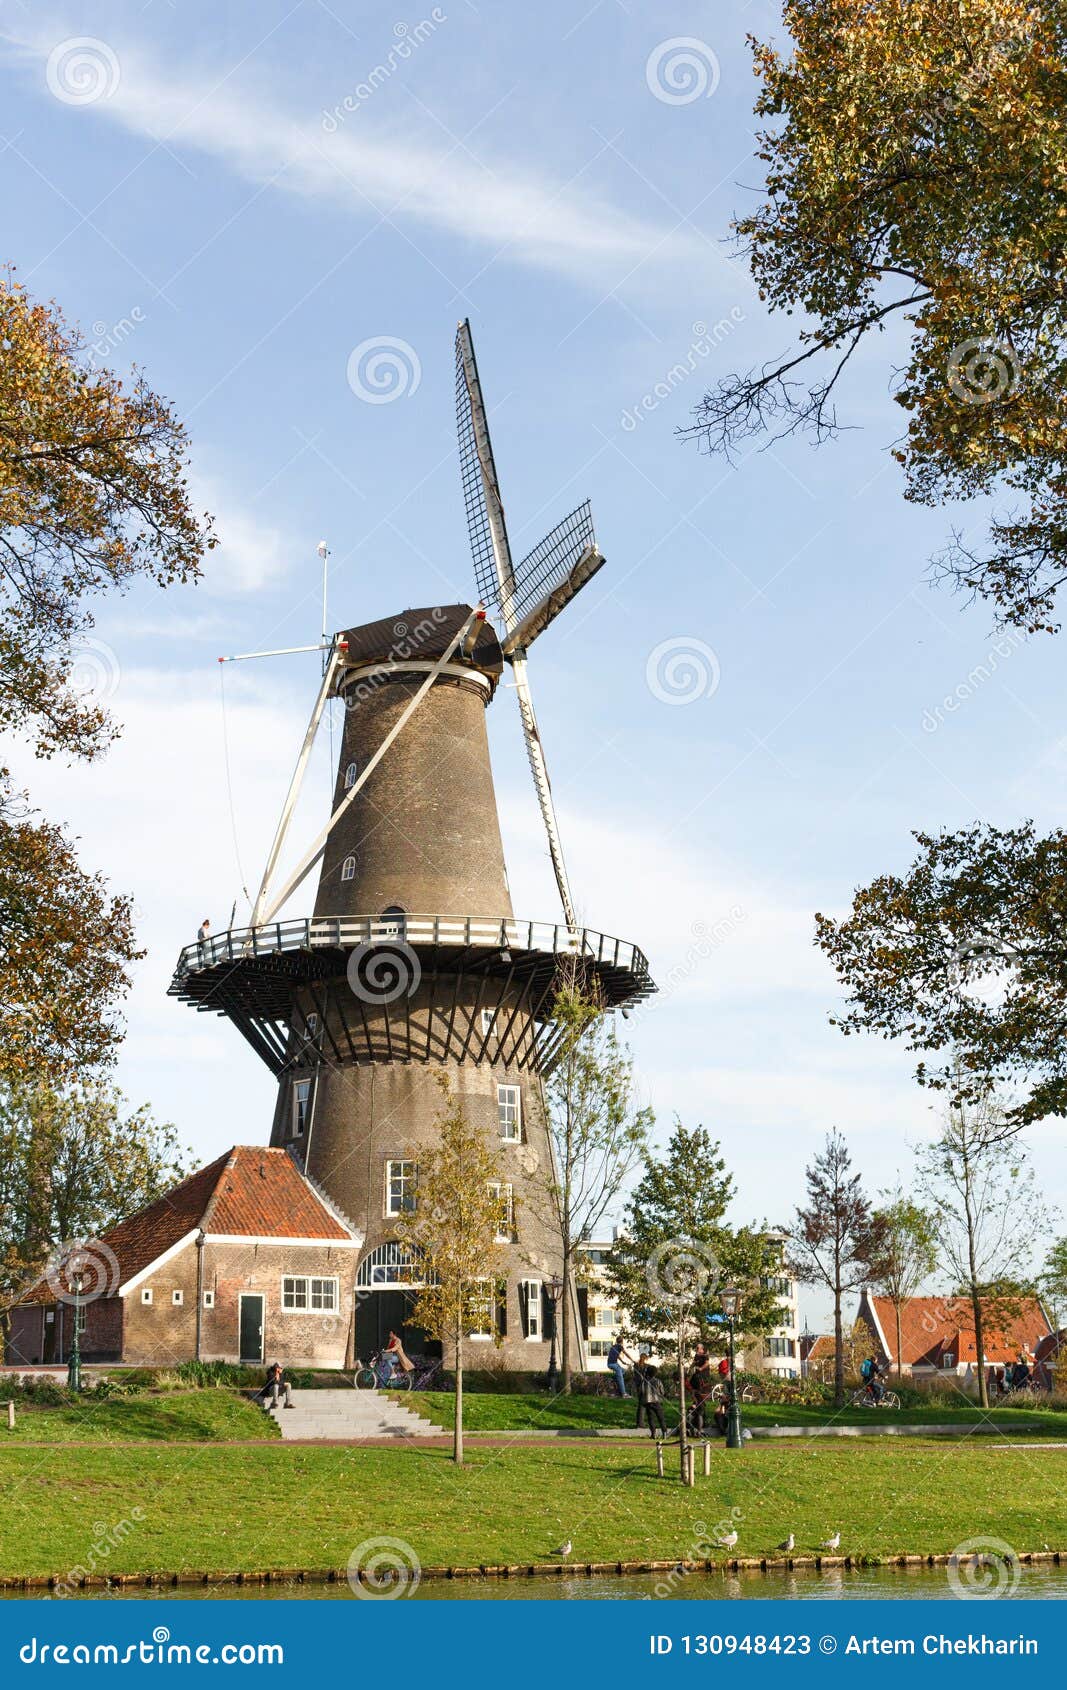 Molen De Valk Windmill At Leiden Netherlands Sunny Day And Sky With Clouds Stock Image 